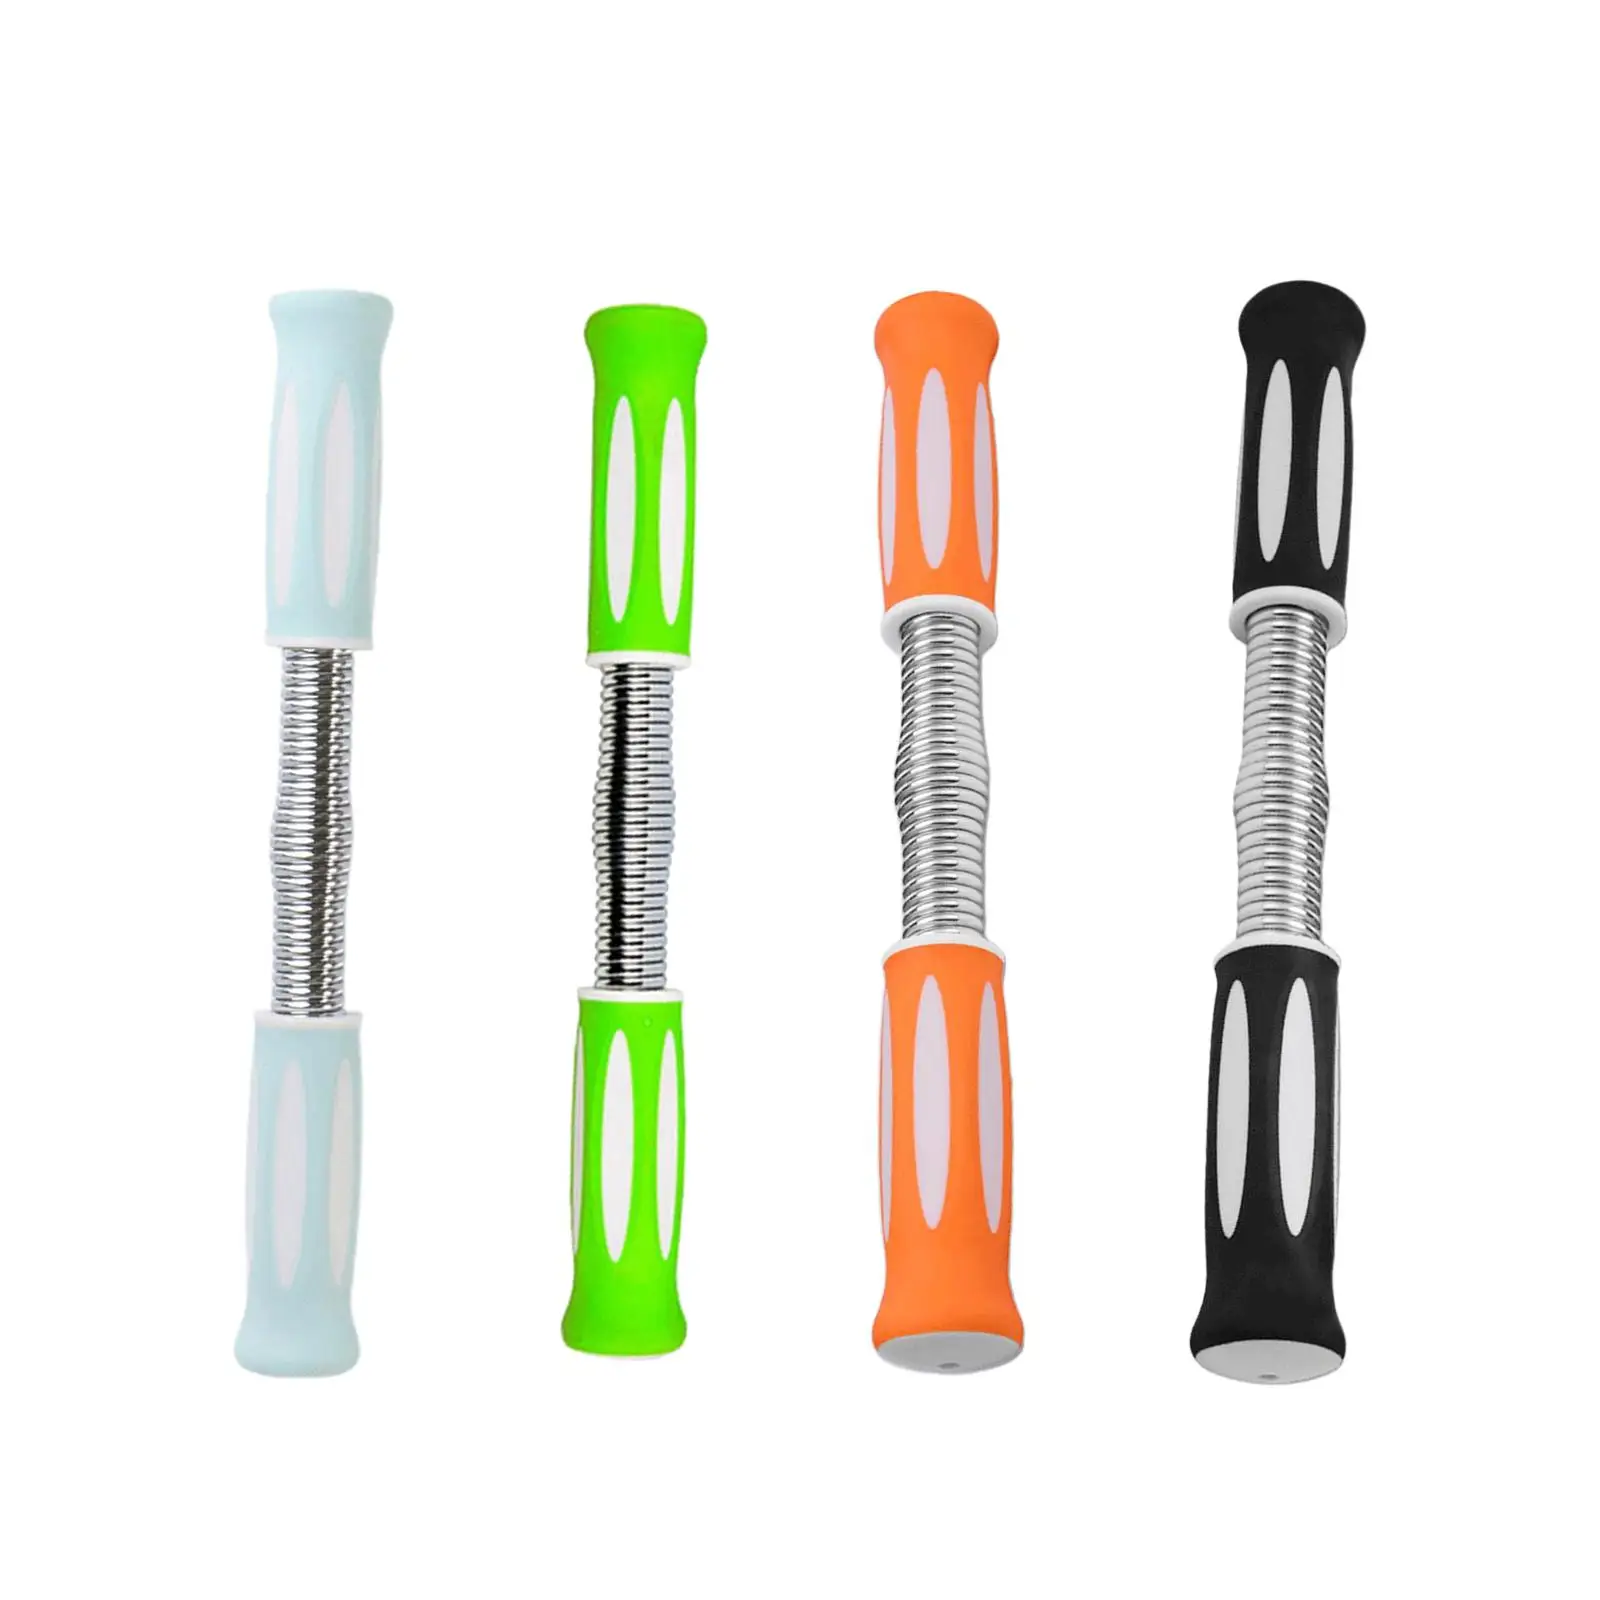 Chest Expander Hand Grip Strengthener Chest Builder Power Twister Bar Upper Body Exercise for Bicep Trainer Muscle Training Back